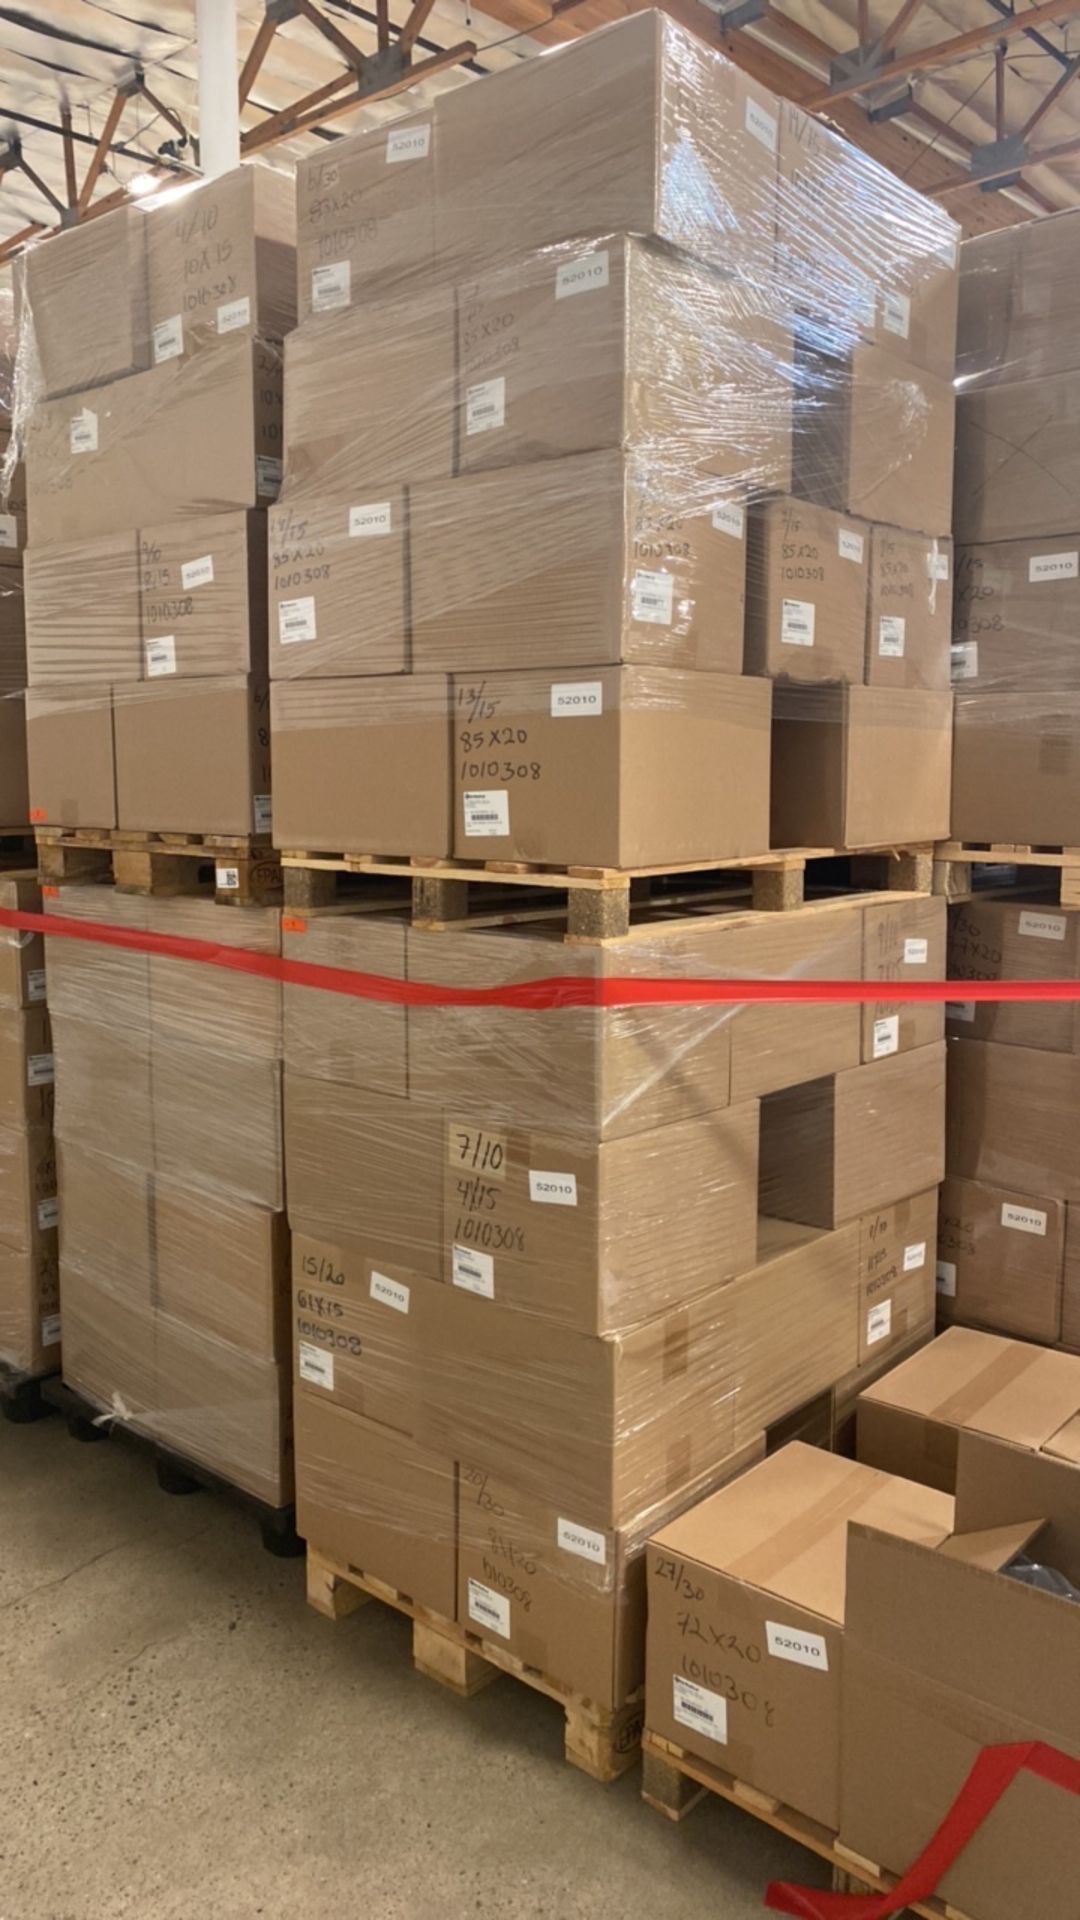 OHIO MEDICAL HS-10UO-DFDHC4 PALLET OF 10 FT. OXYGEN HOSE ASSEMBLY QTY: 20 CASES/20 HOSES PER CASE - Image 3 of 3